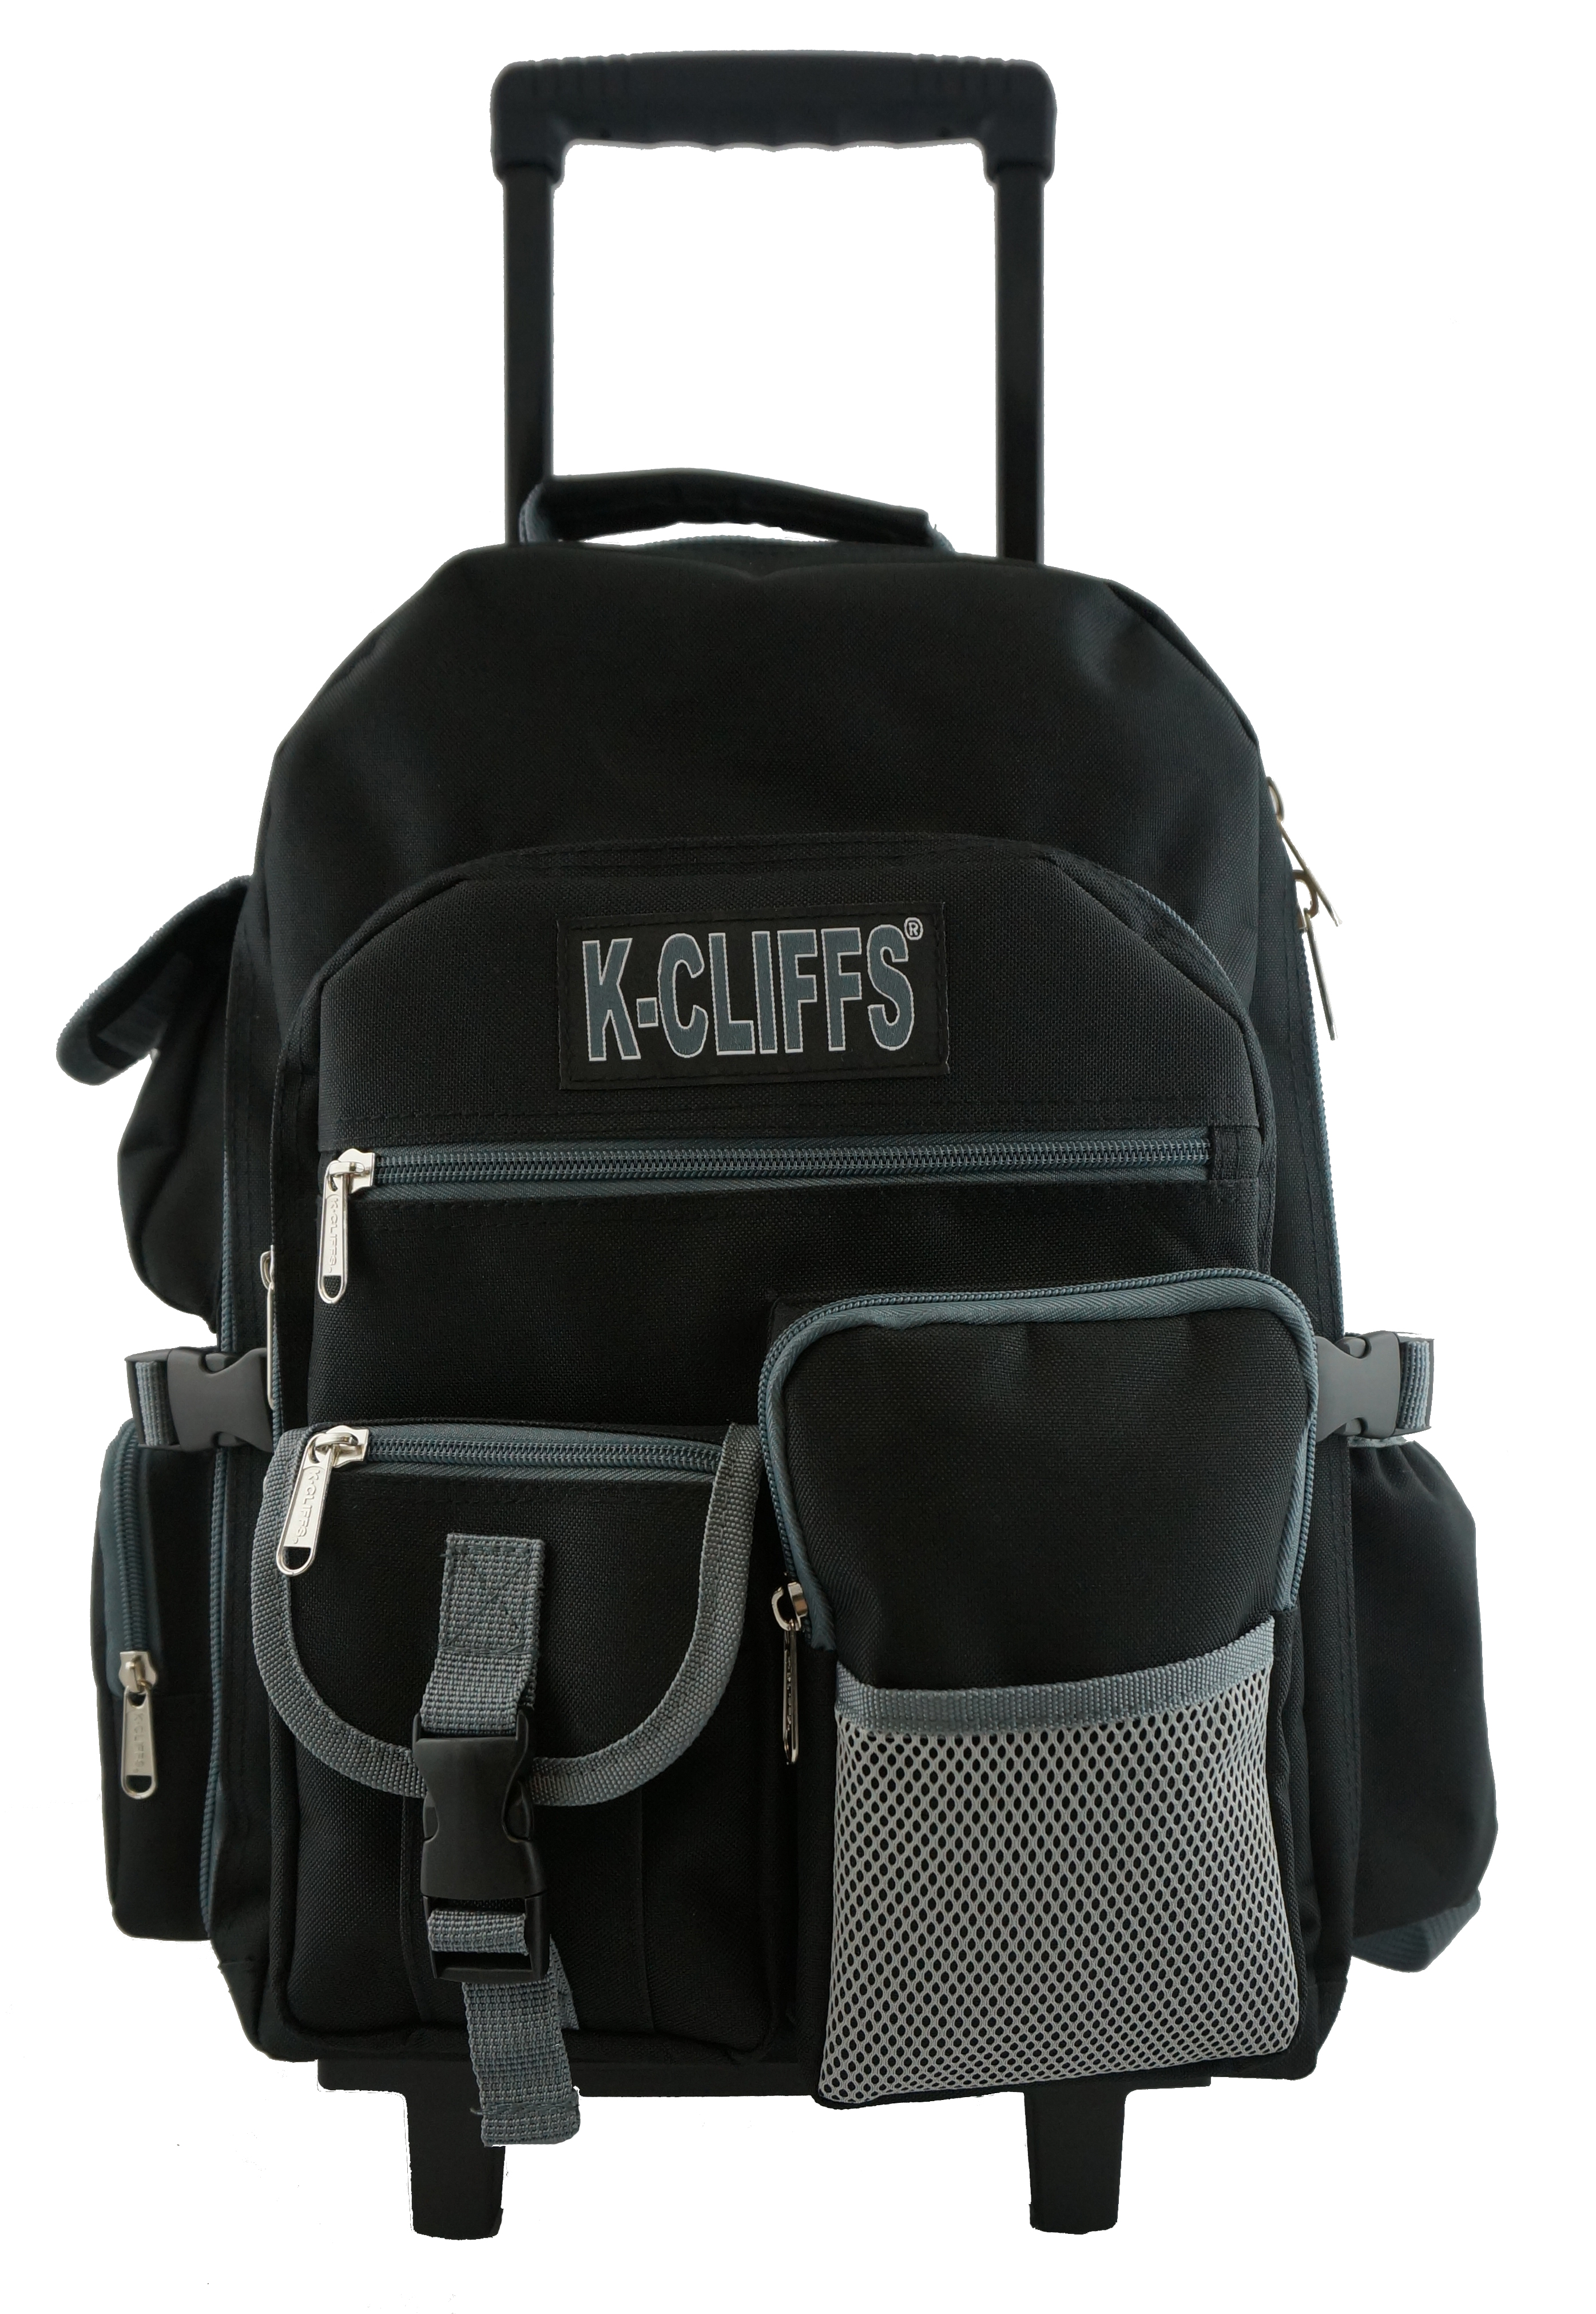 K-Cliffs Rolling Backpack Heavy Duty School Backpack with Wheels  Daypack multiple Pockets Black - image 1 of 10